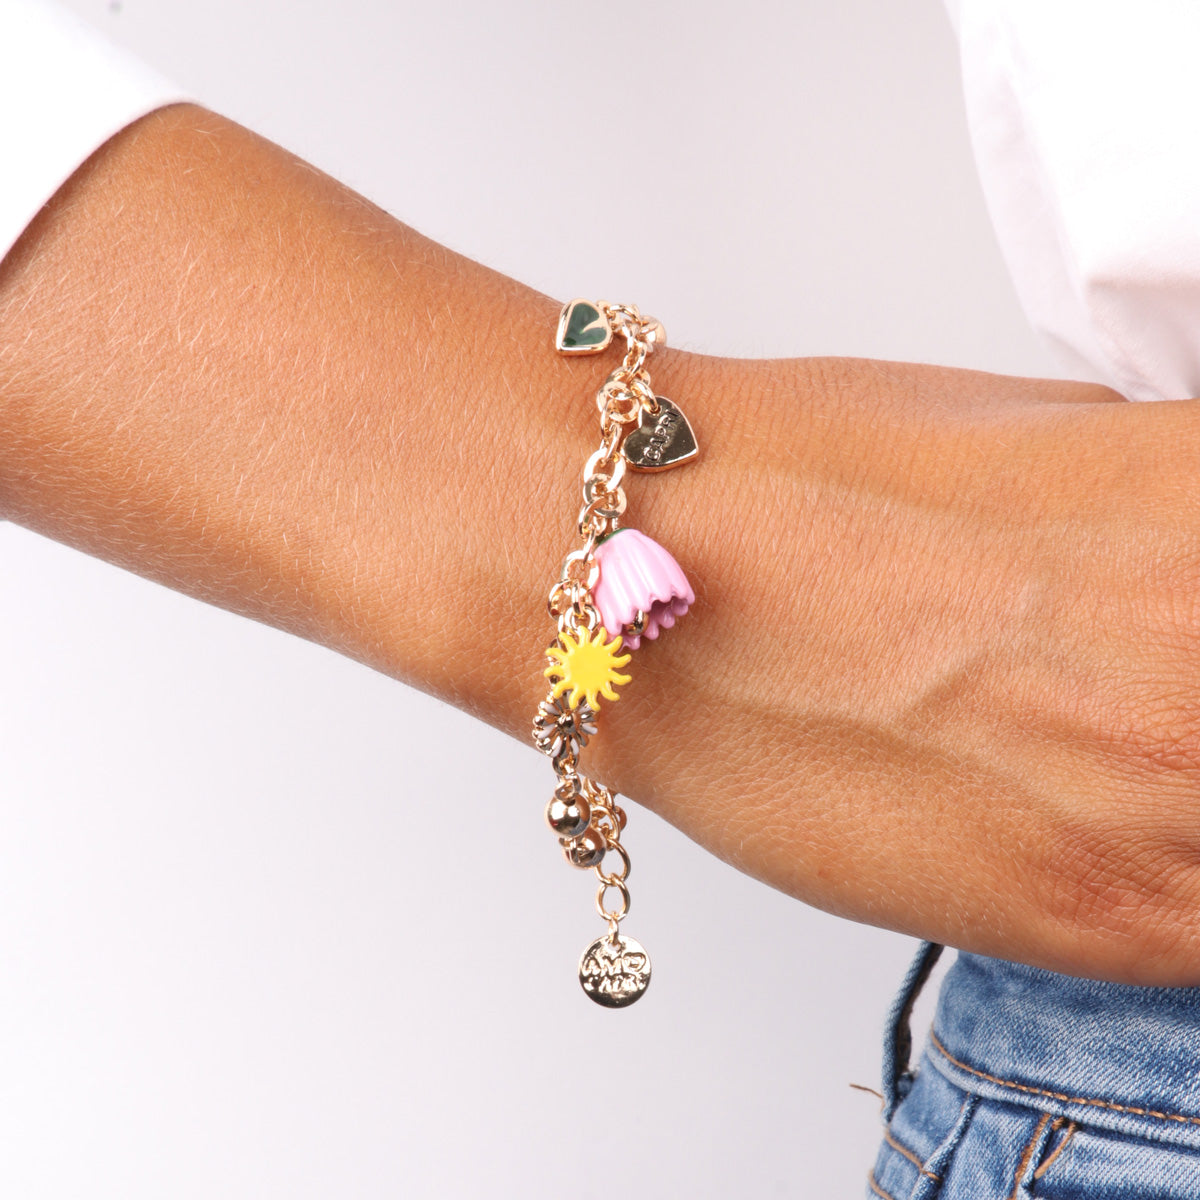 Metal bracelet with flower, sun, heart with capri writing, leaf and bell -shaped bell -shaped bell